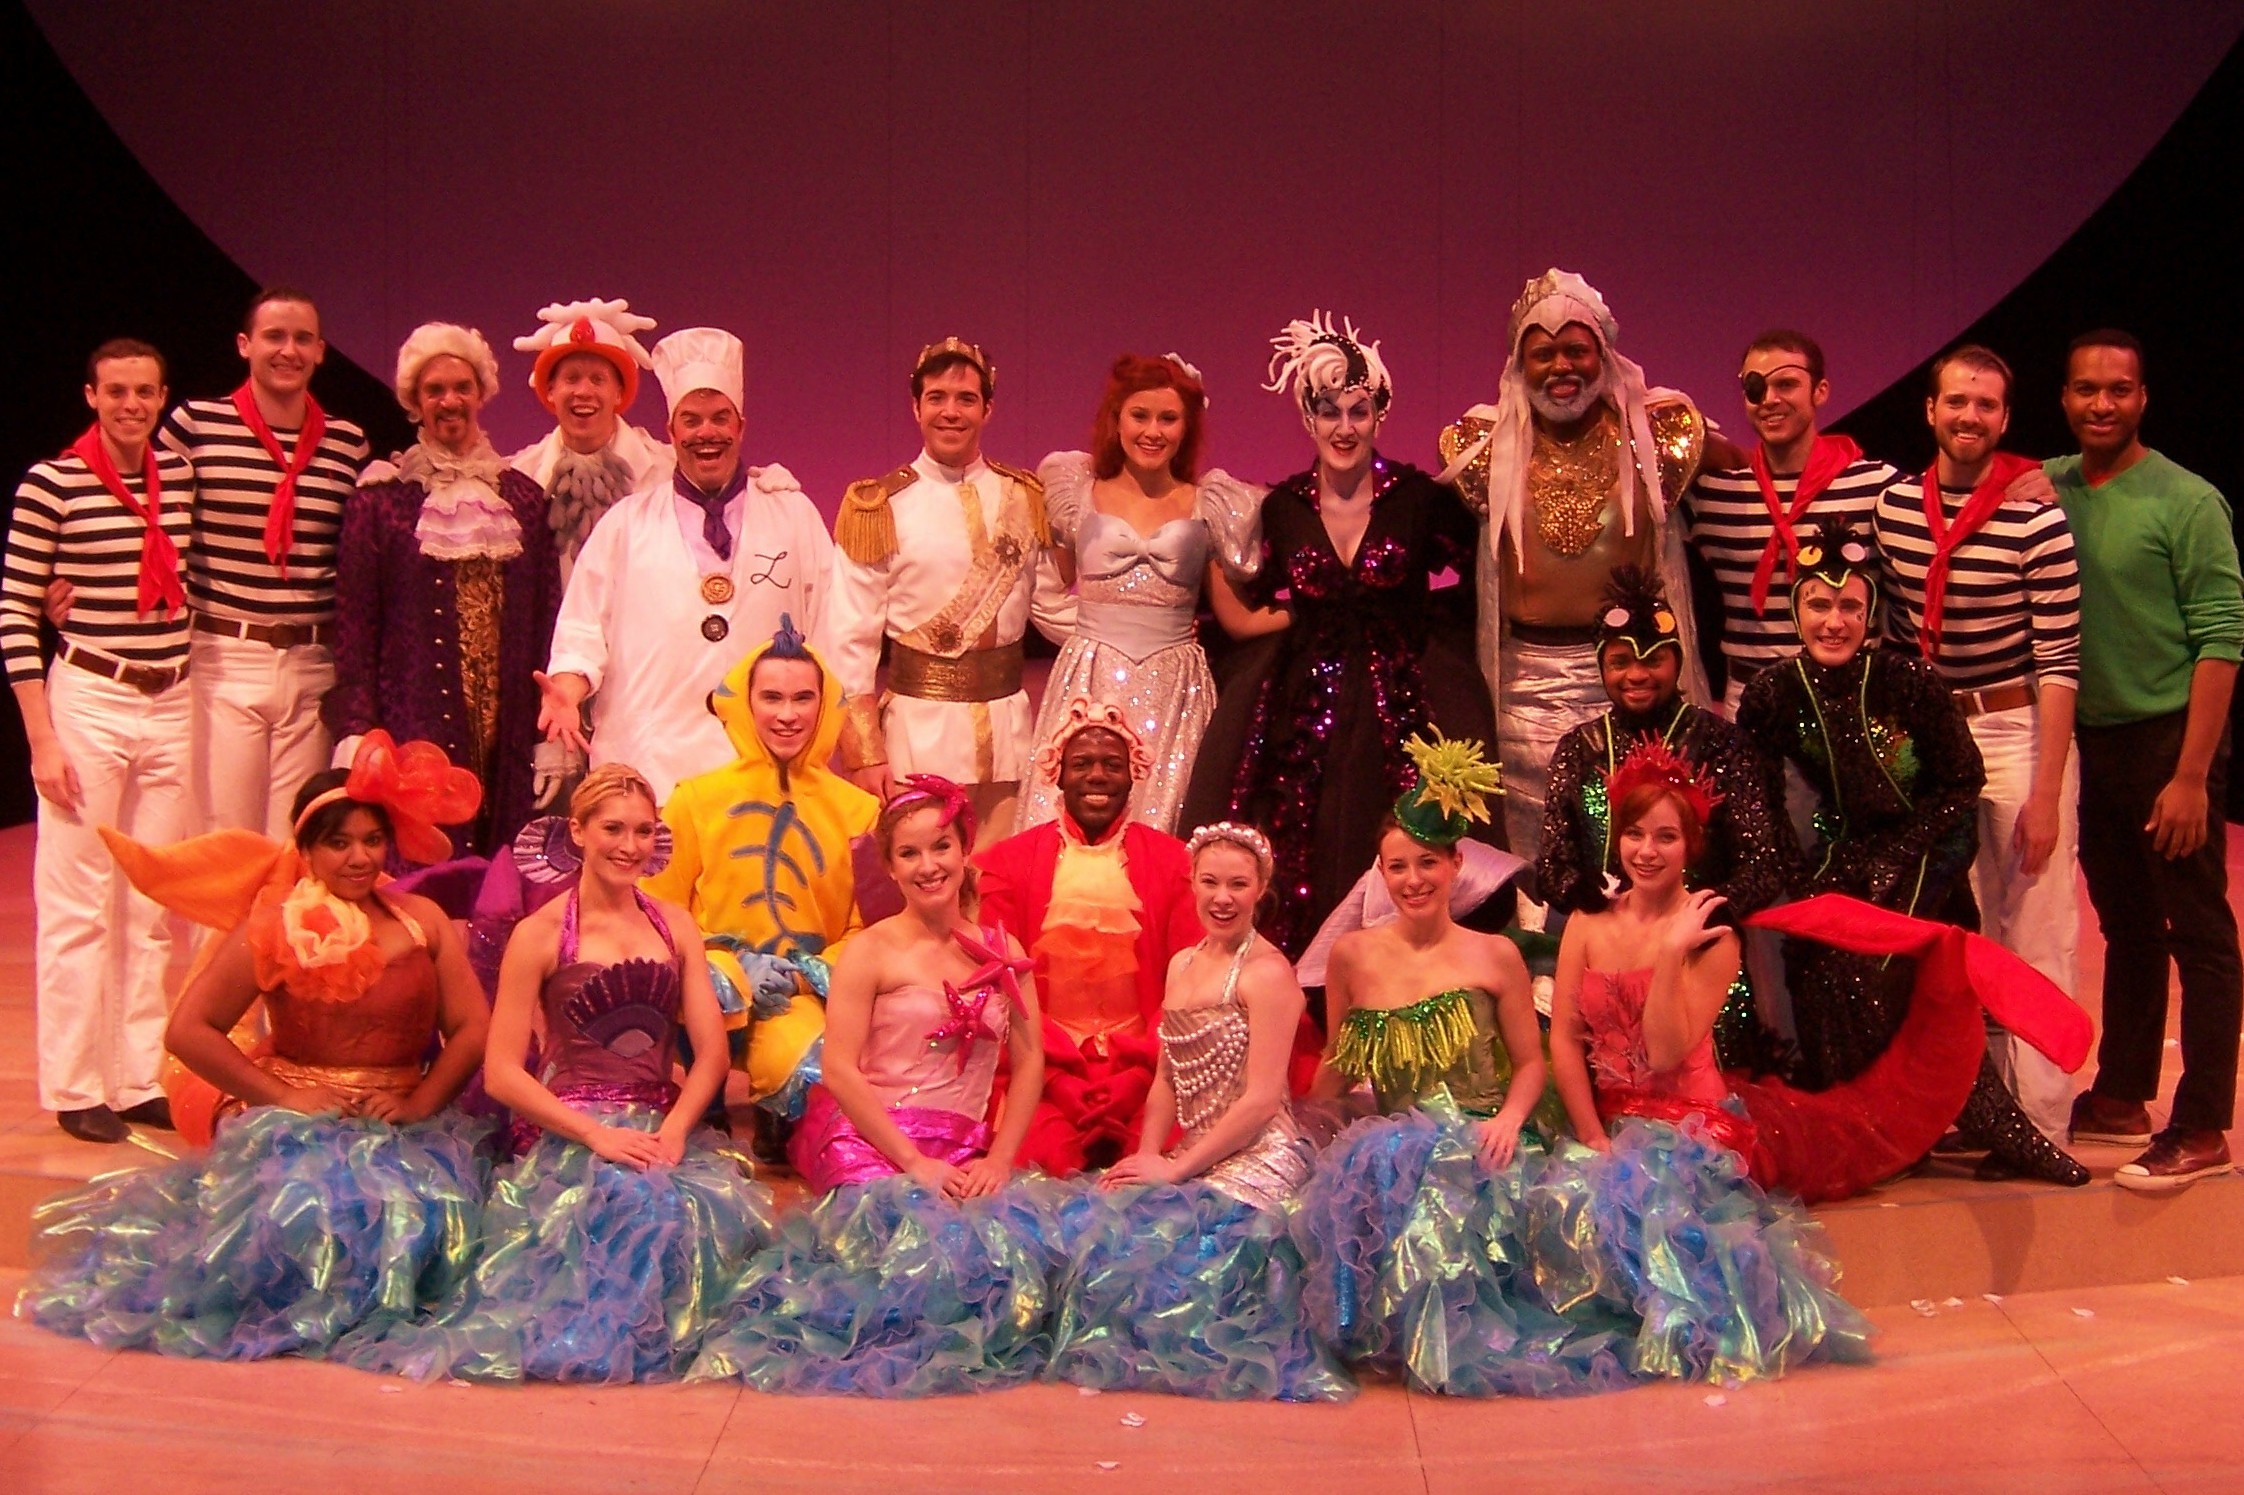  The Cast of The Little Mermaid at Olney Theatre Center.&nbsp;Directed by Mark Waldrop, Costumes by Pei Lee, Scenic Design by James Fouchard. 